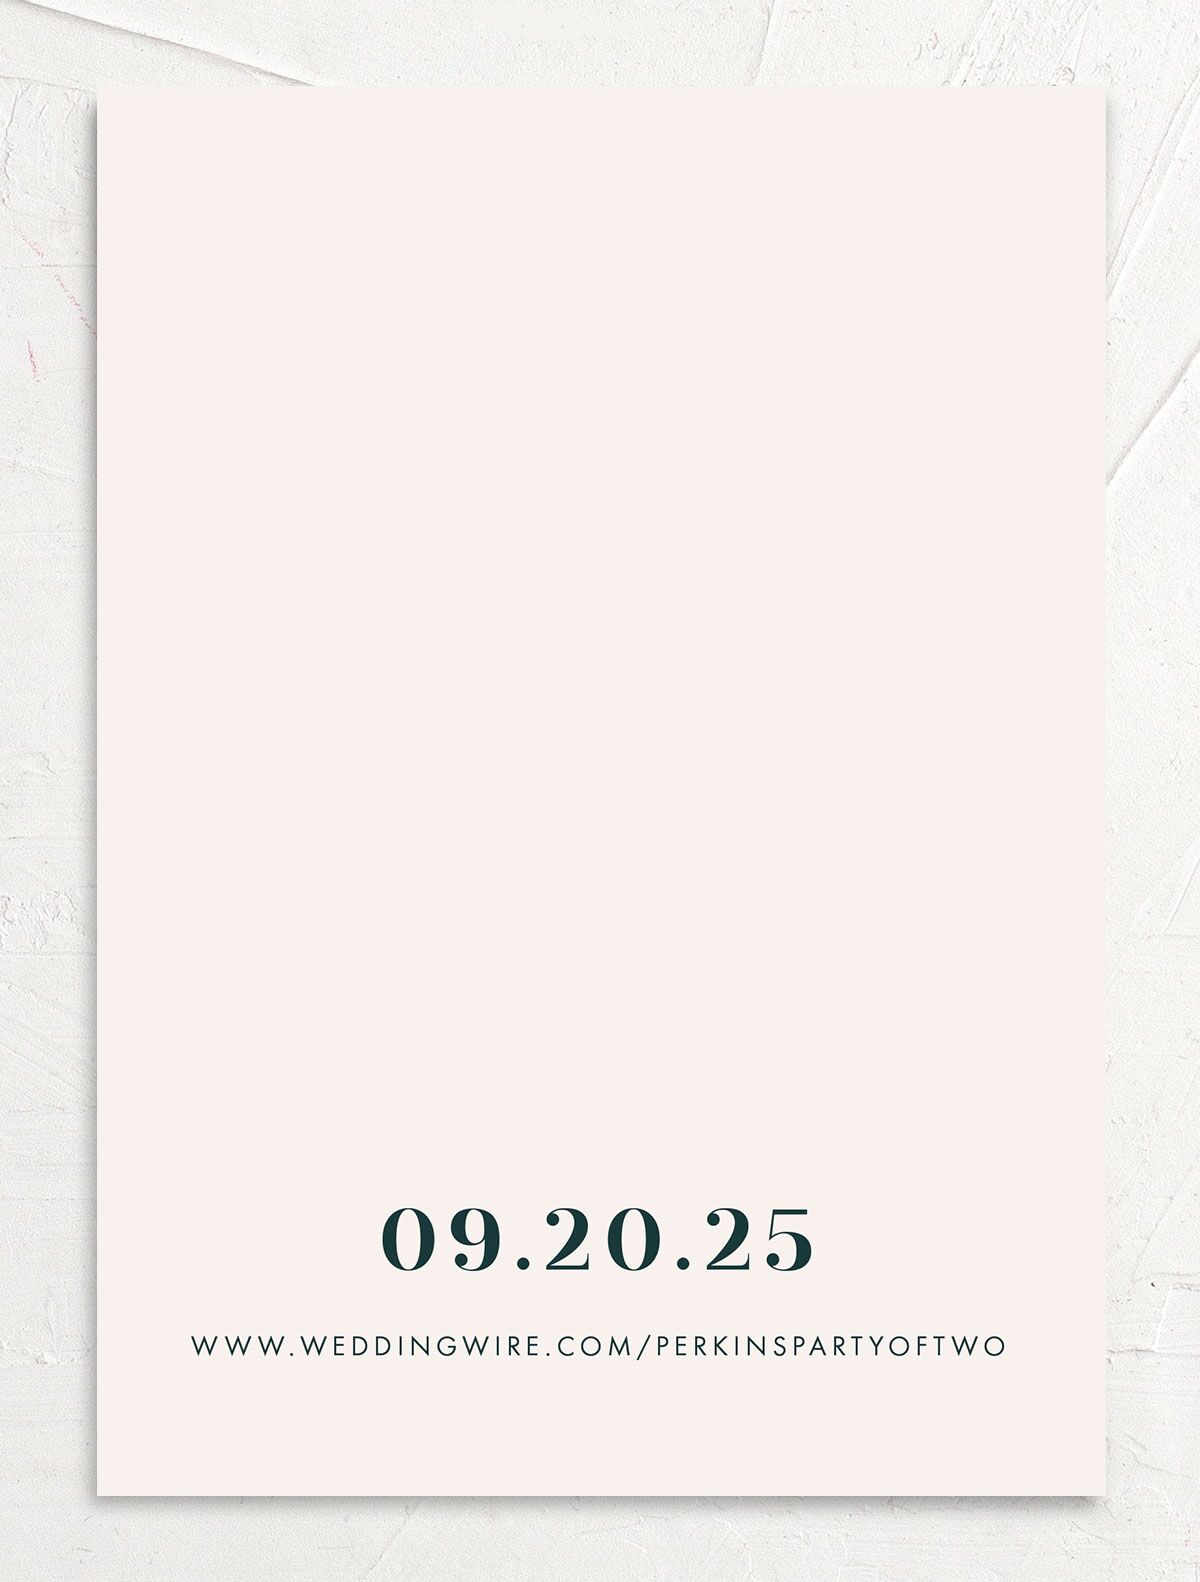 Midcentury Chic Save the Date Cards back in Turquoise